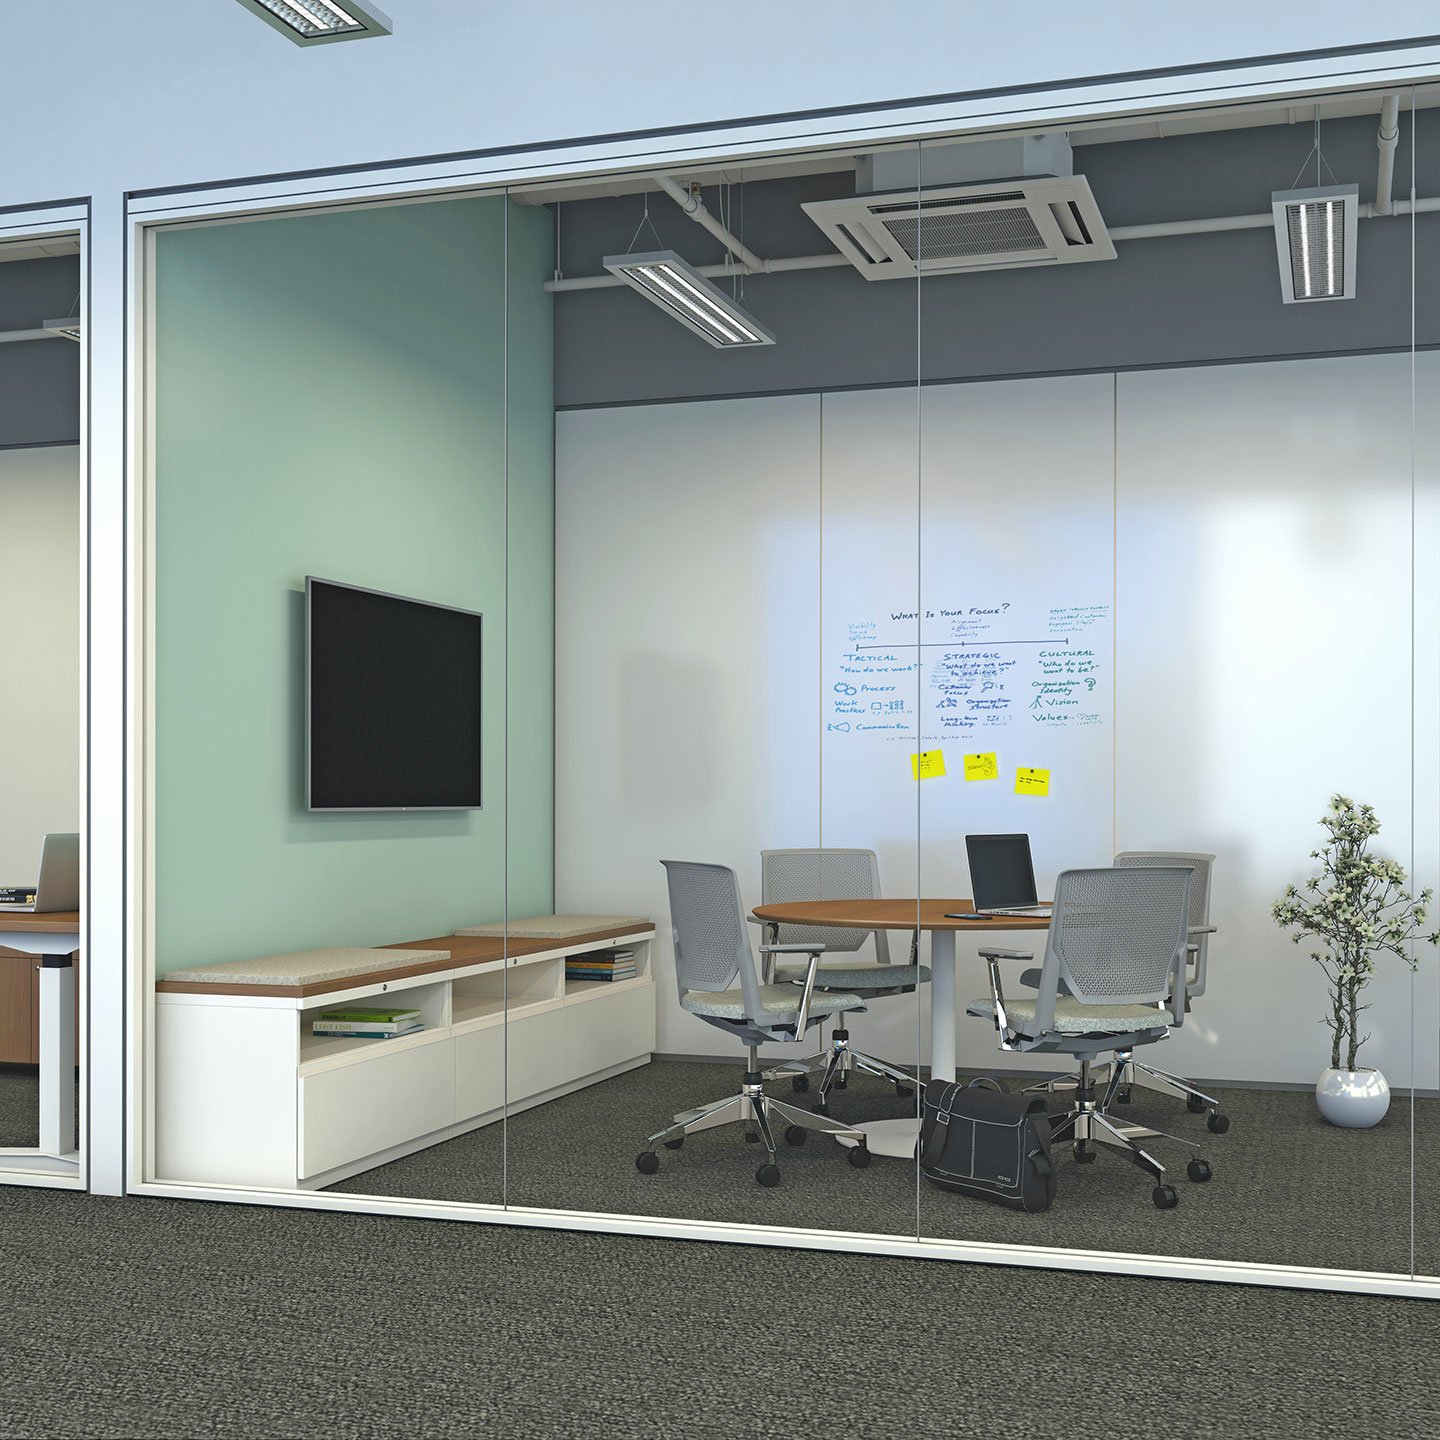 Haworth X Series Desks in laminate color in private conference room for collaboration with whiteboard and monitor on wall